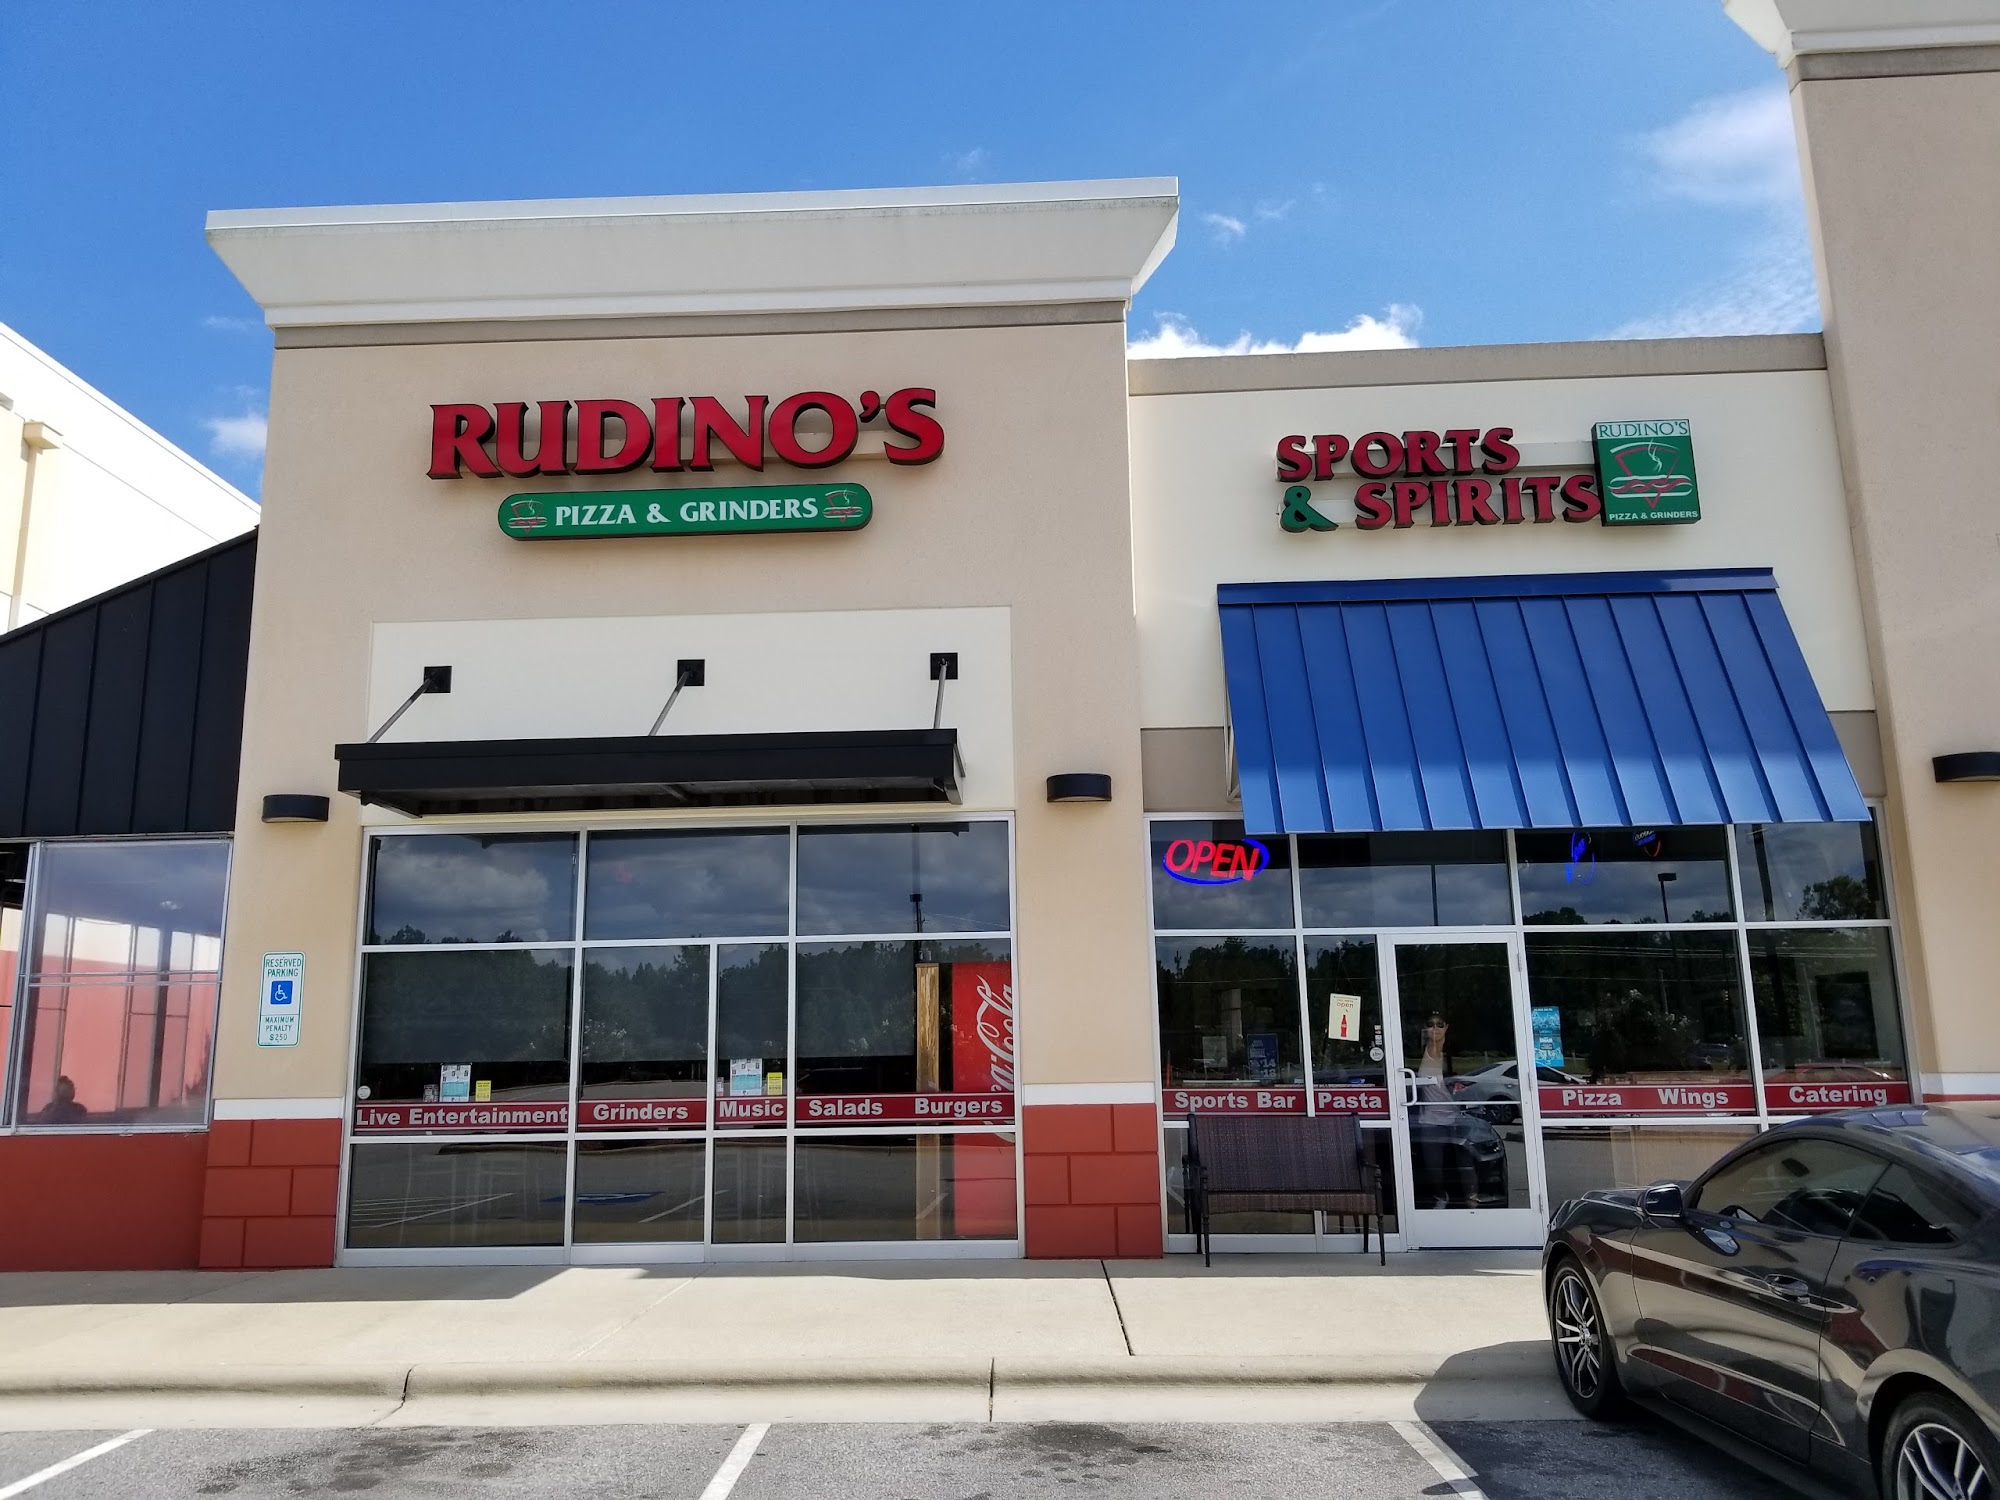 Rudino's Pizza and Grinders